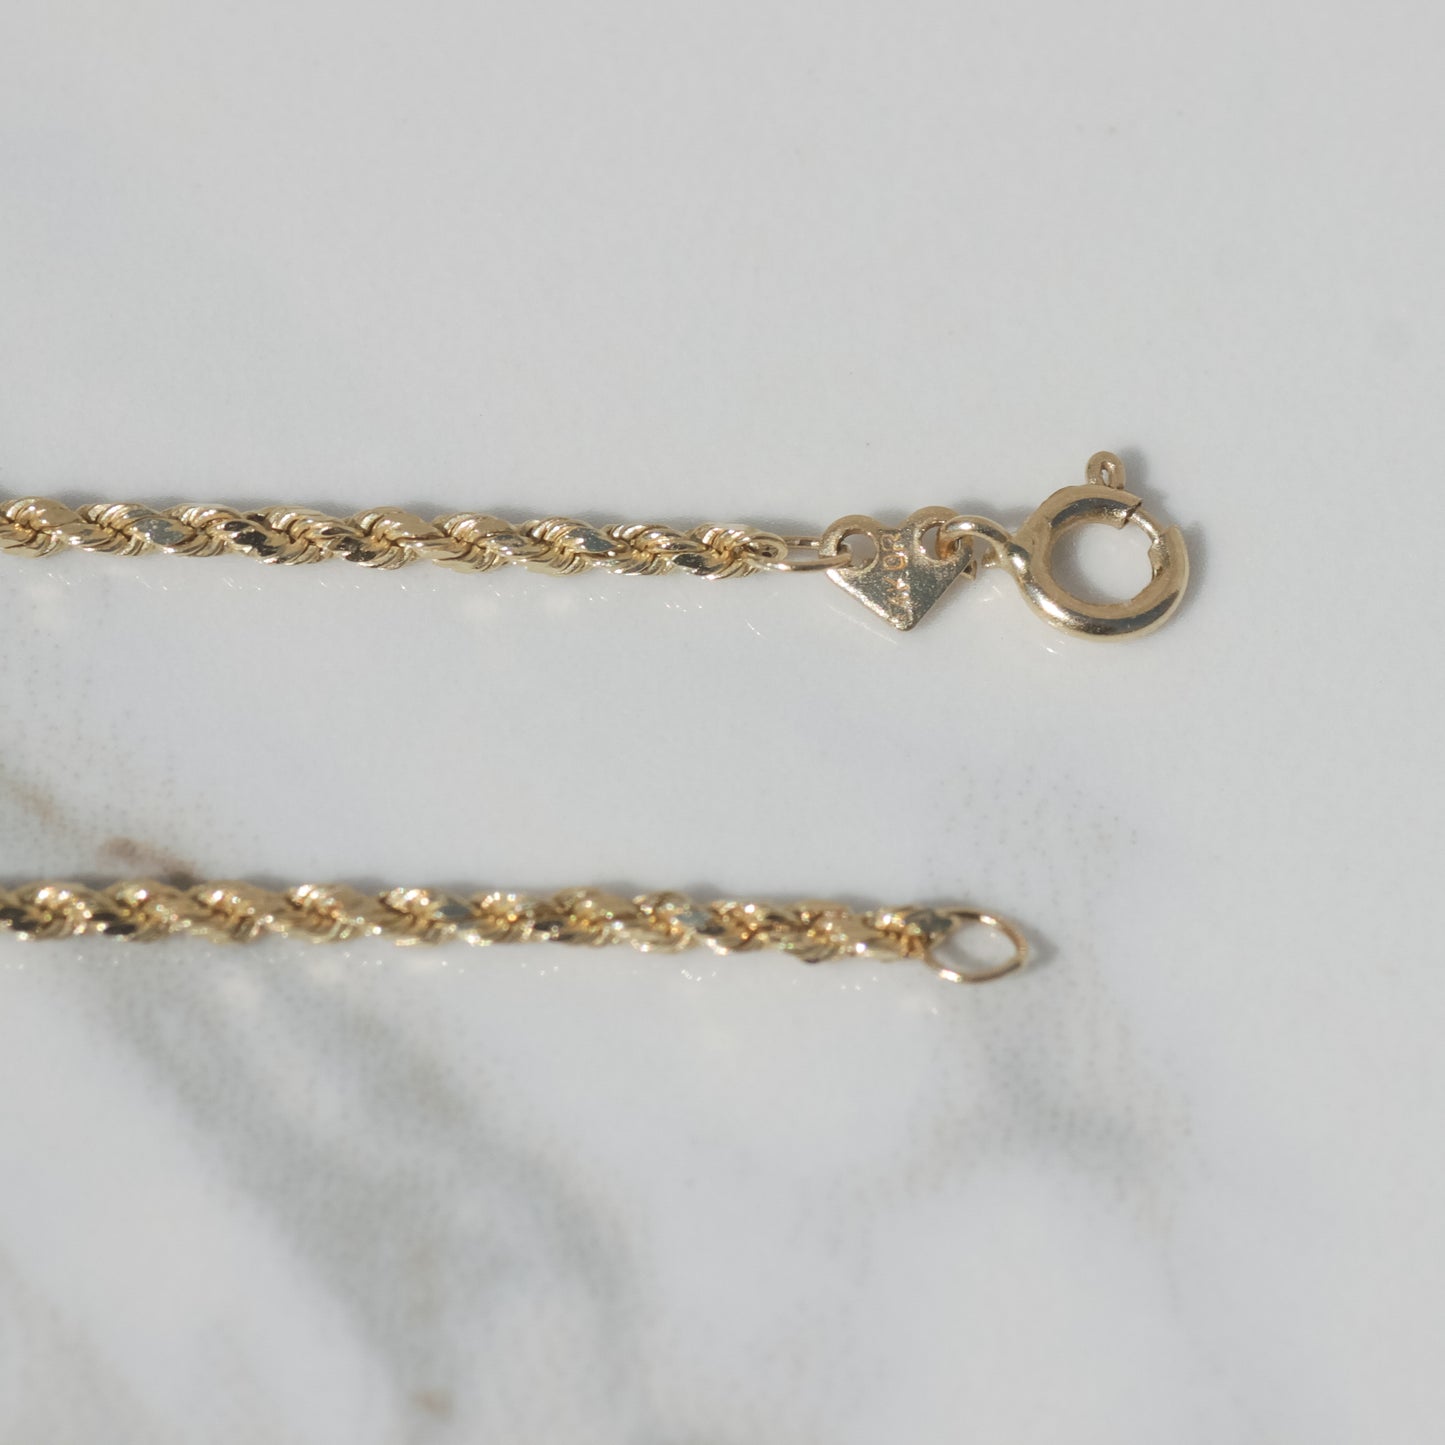 Vintage Rope Chain Necklace 24" 14k Gold